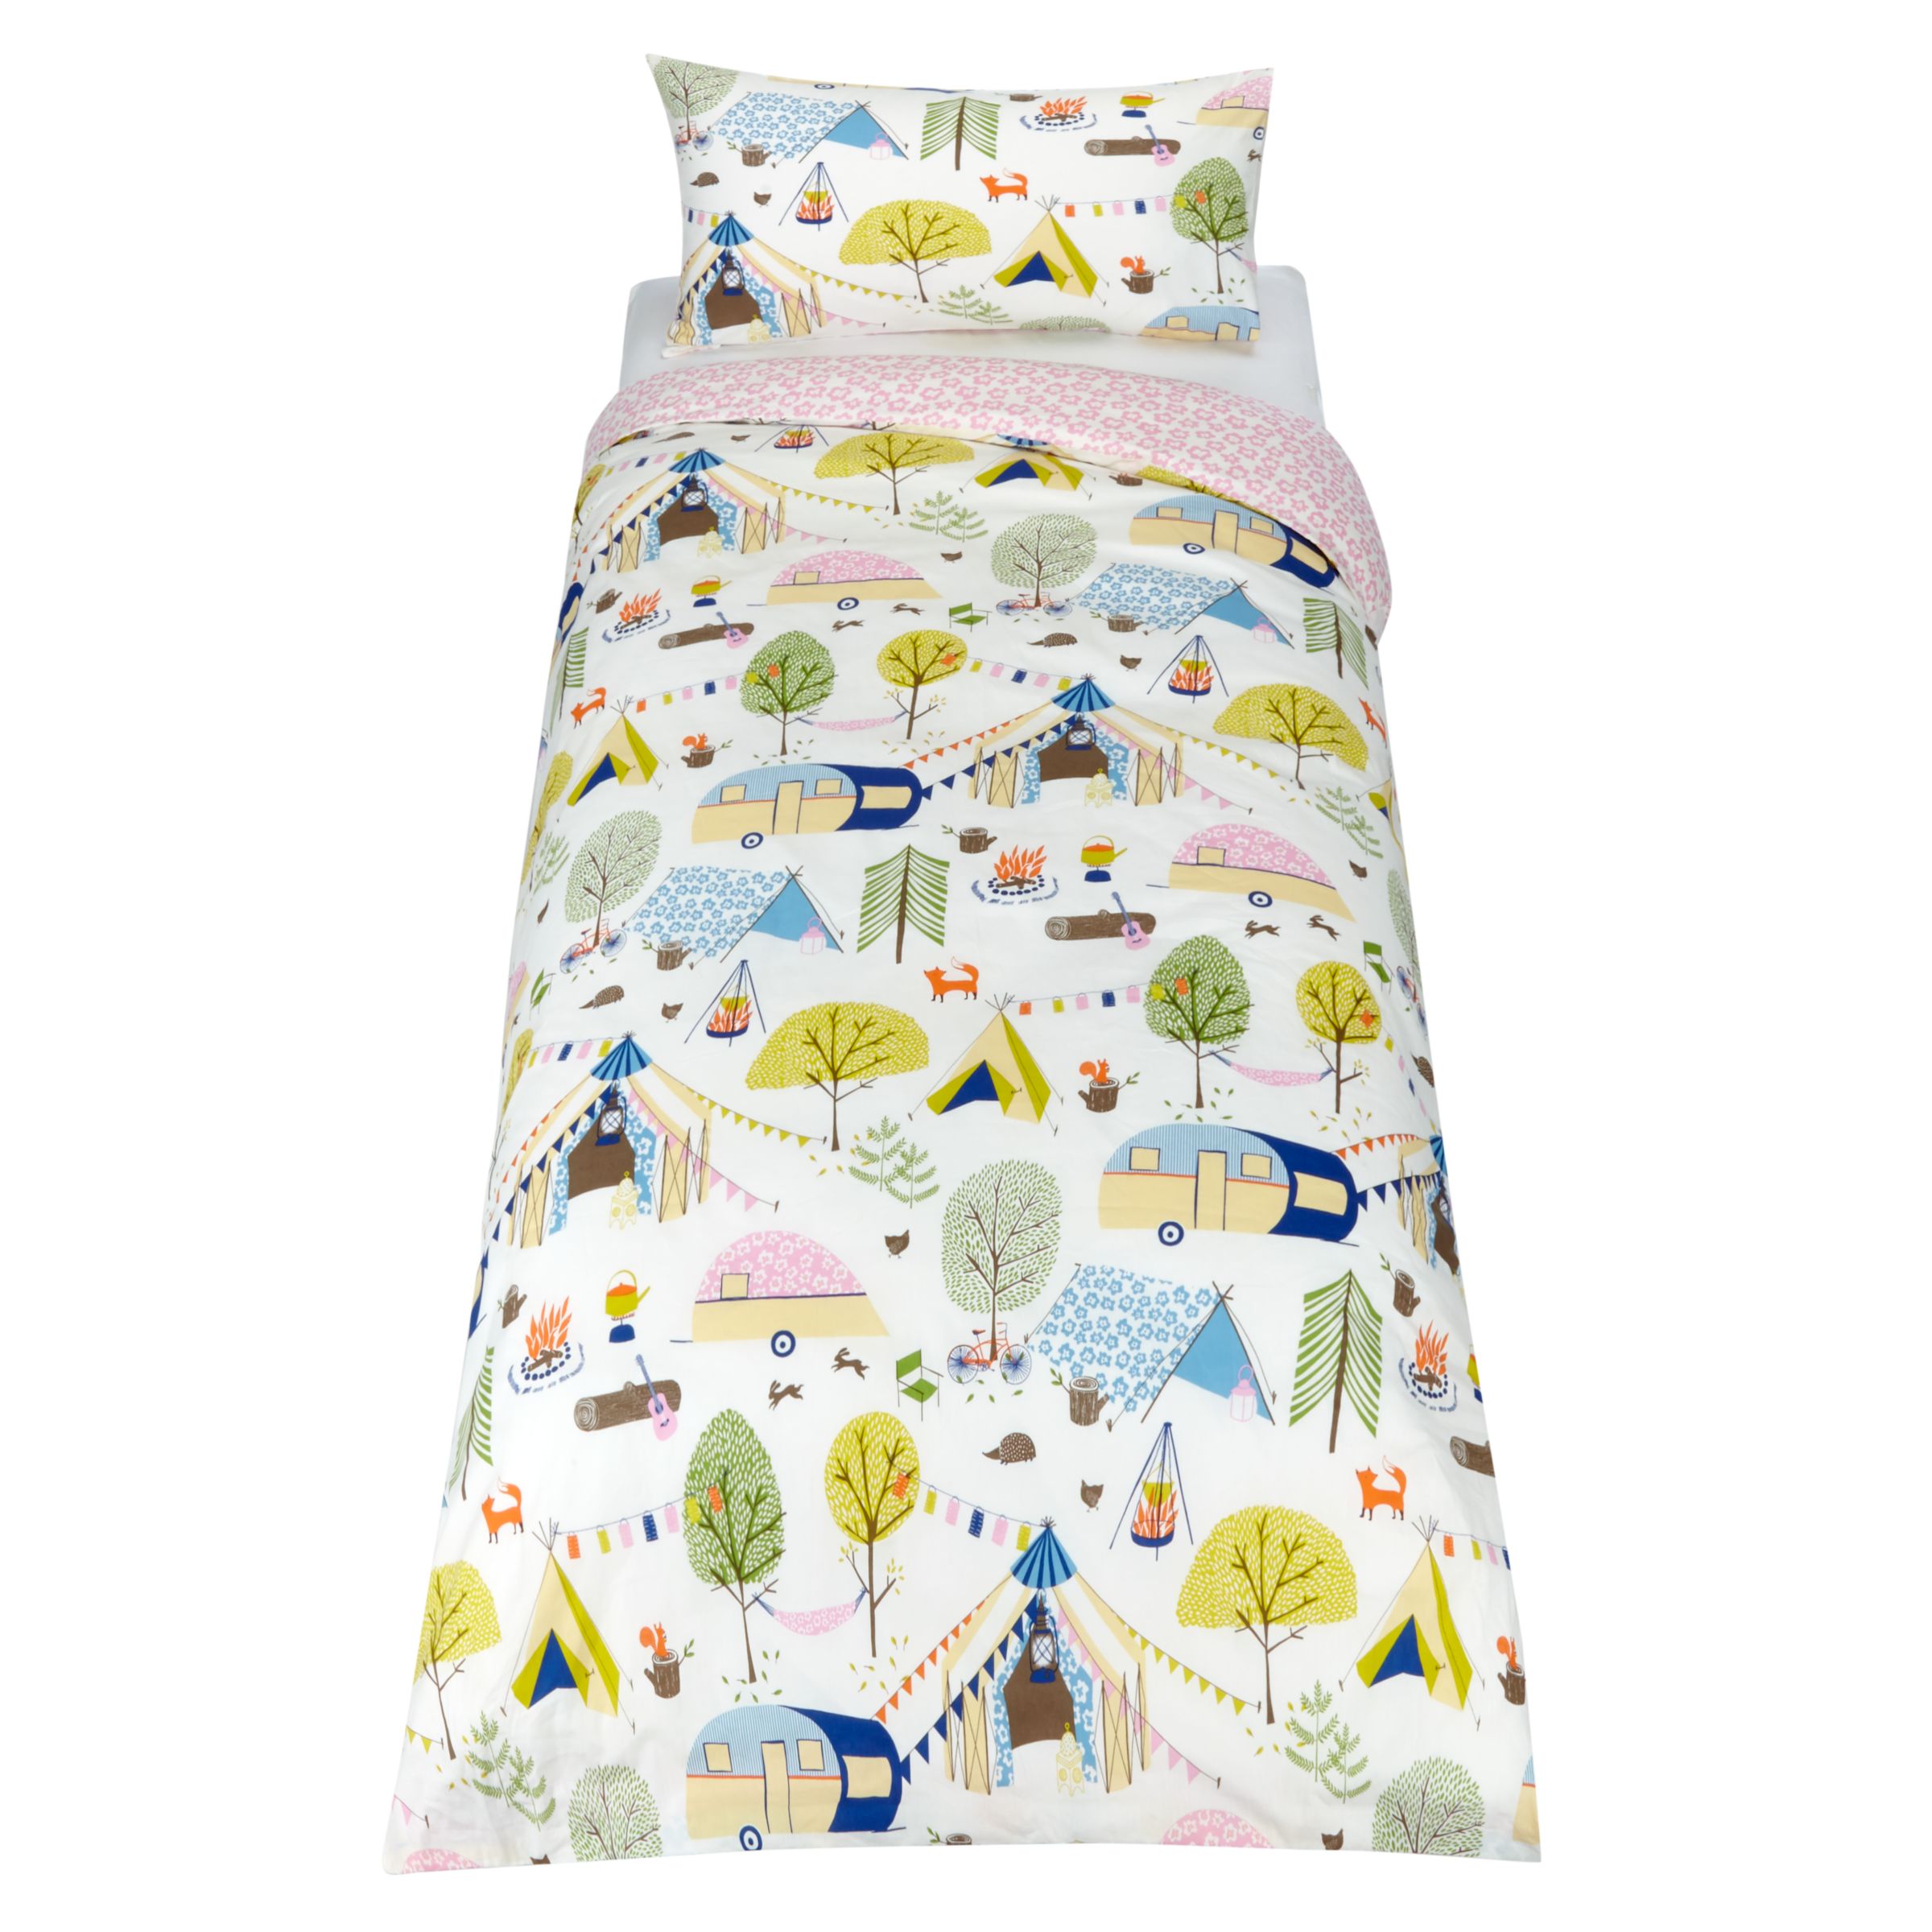 Little Home At John Lewis Camping Duvet Cover And Pillowcase Set